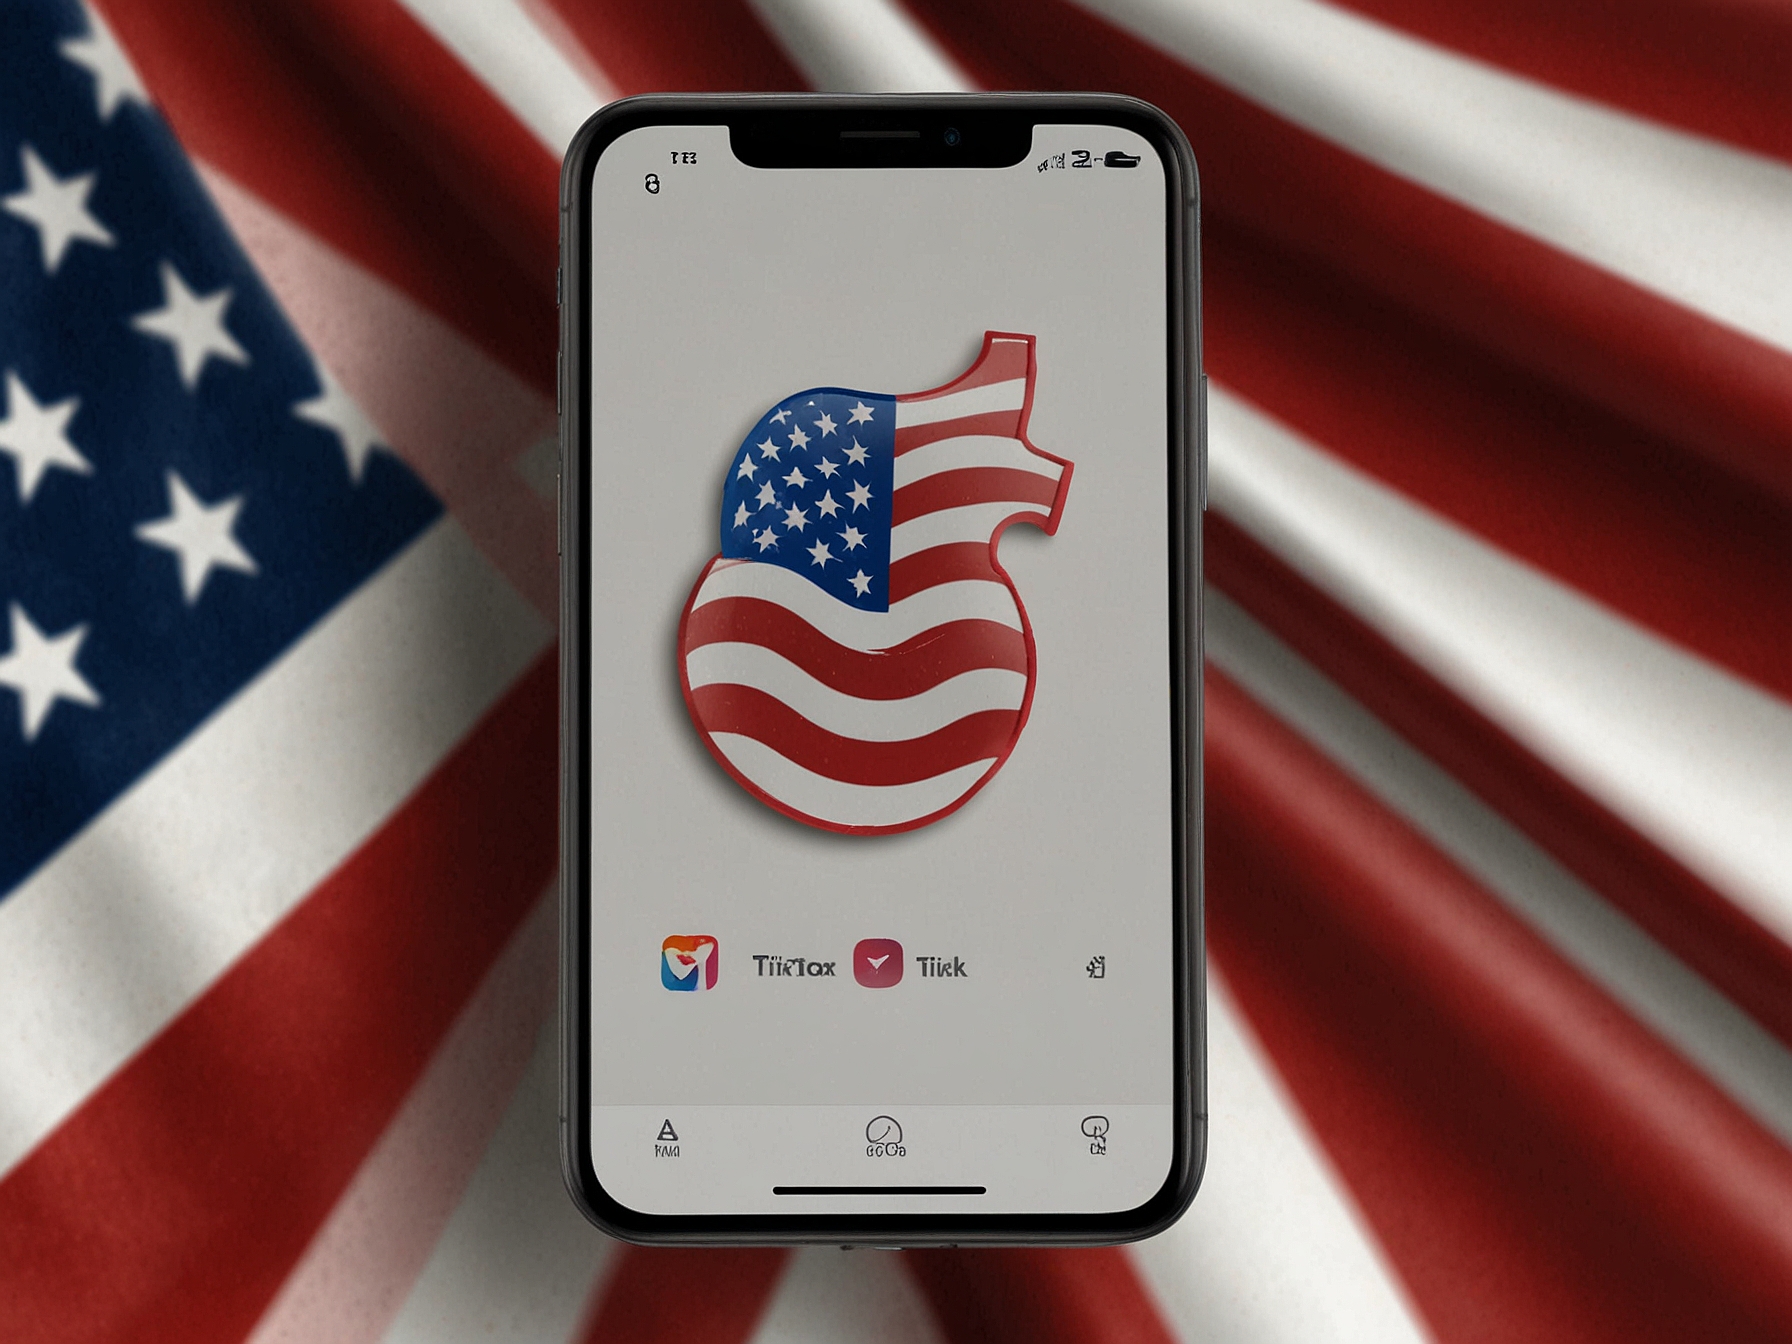 An illustration showing a TikTok logo with an American flag backdrop, symbolizing the platform’s ongoing legal and political struggle in the United States.